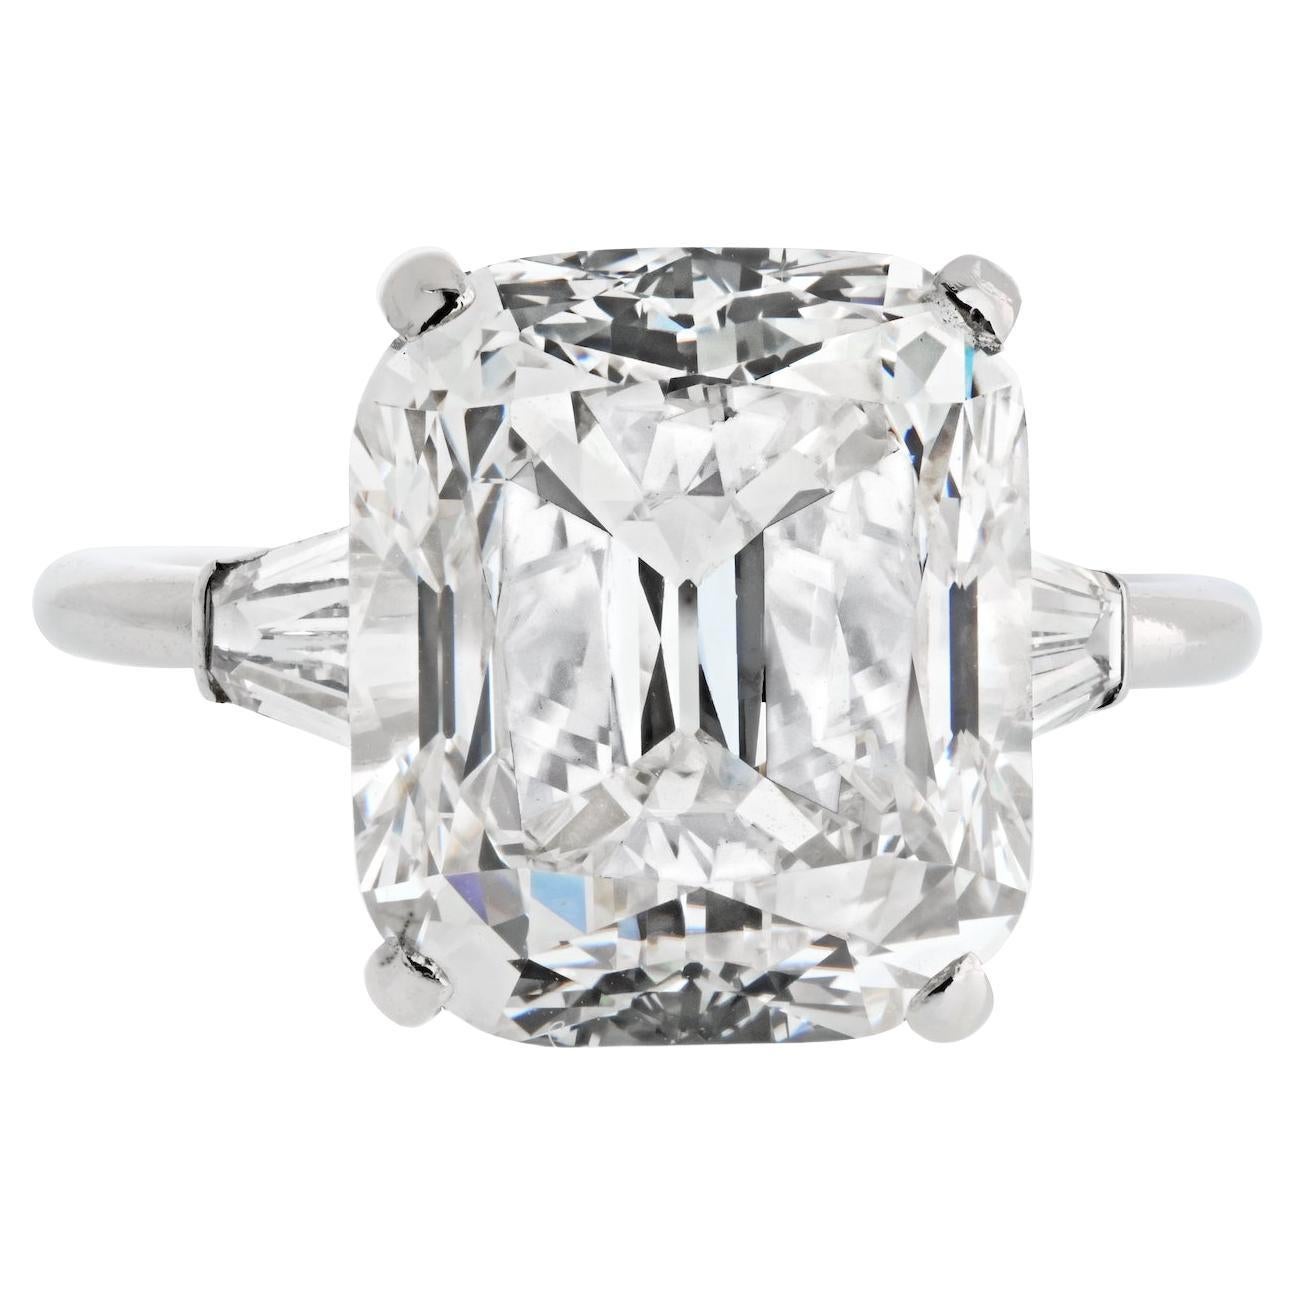 8.17ct Cushion Old Mine Cut Diamond L color SI2 clarity GIA Engagement Ring For Sale